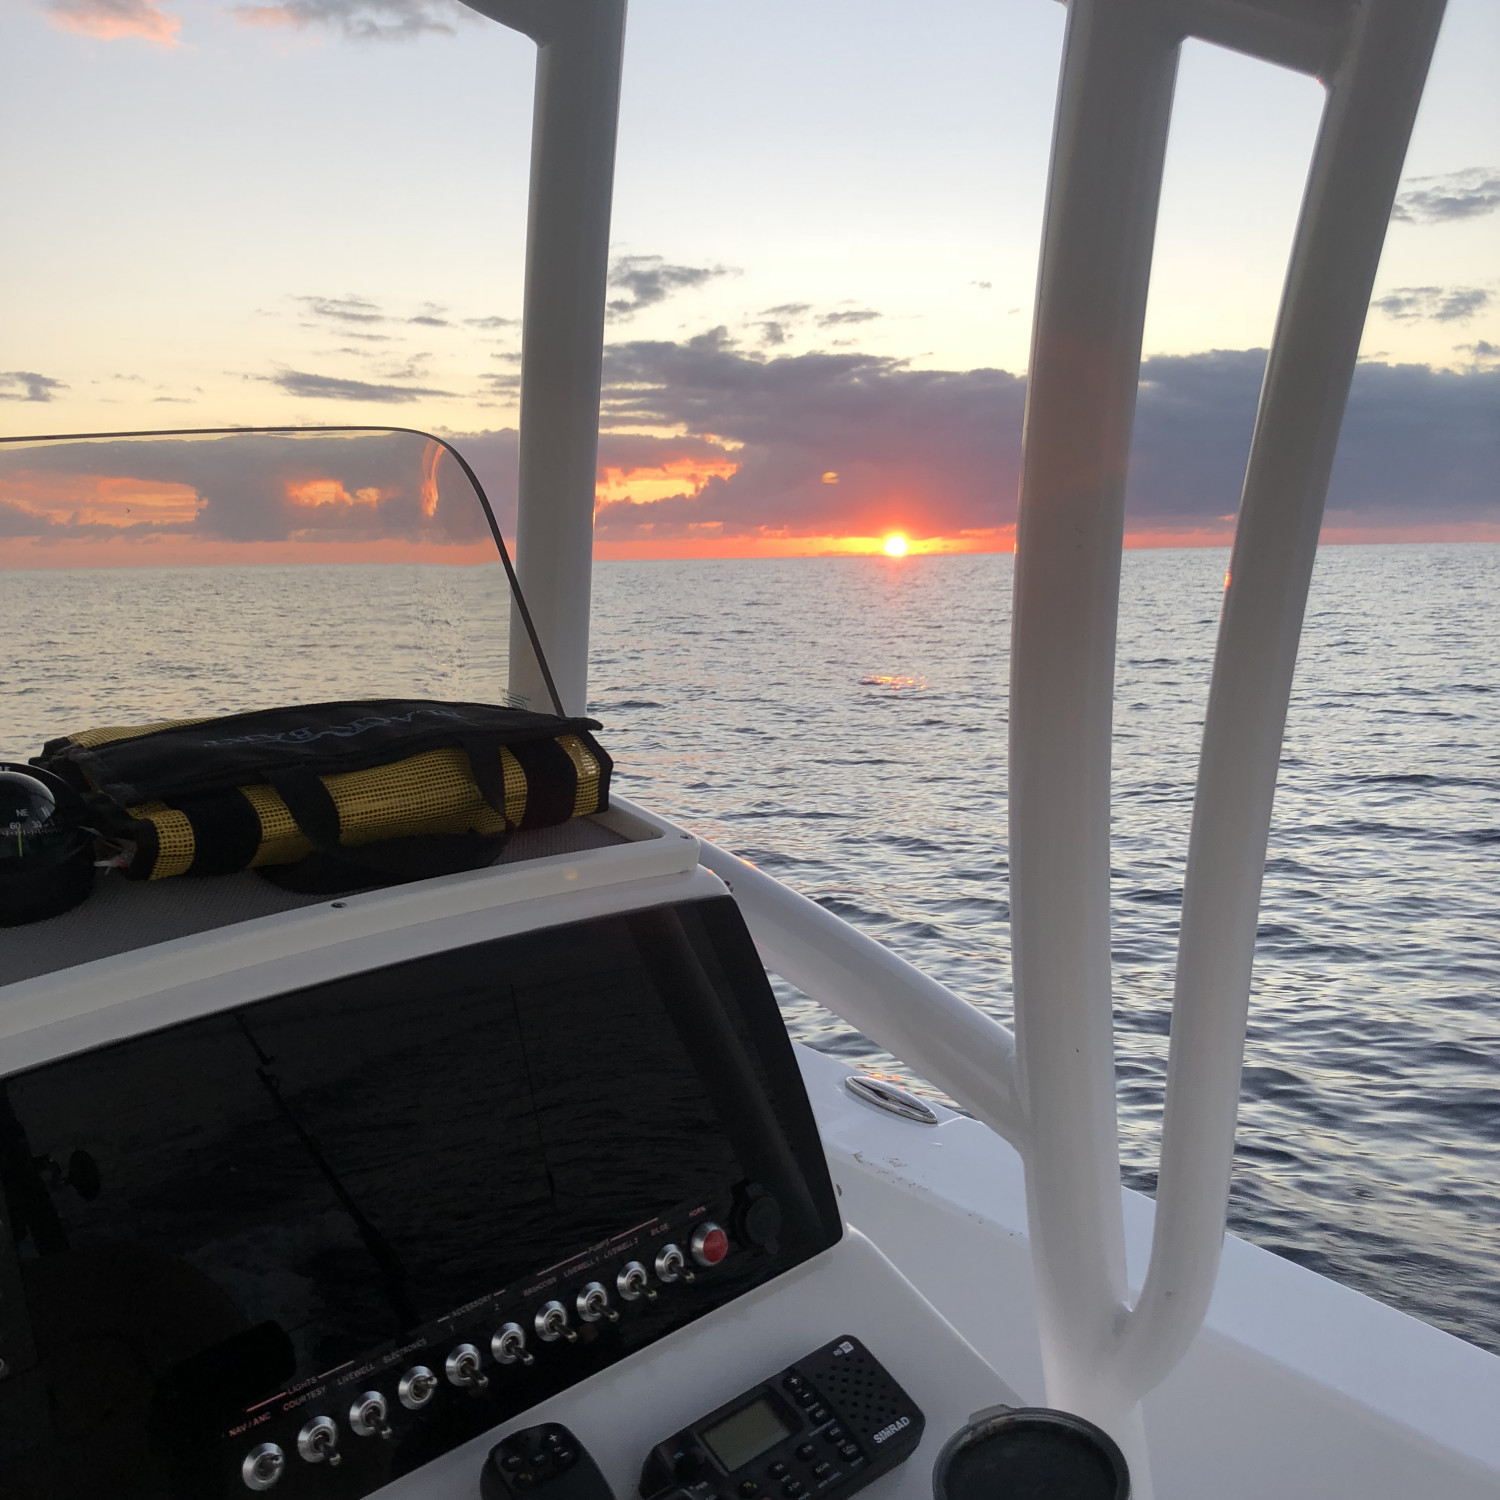 Sunrise on Saturday offshore. Perfect weather.